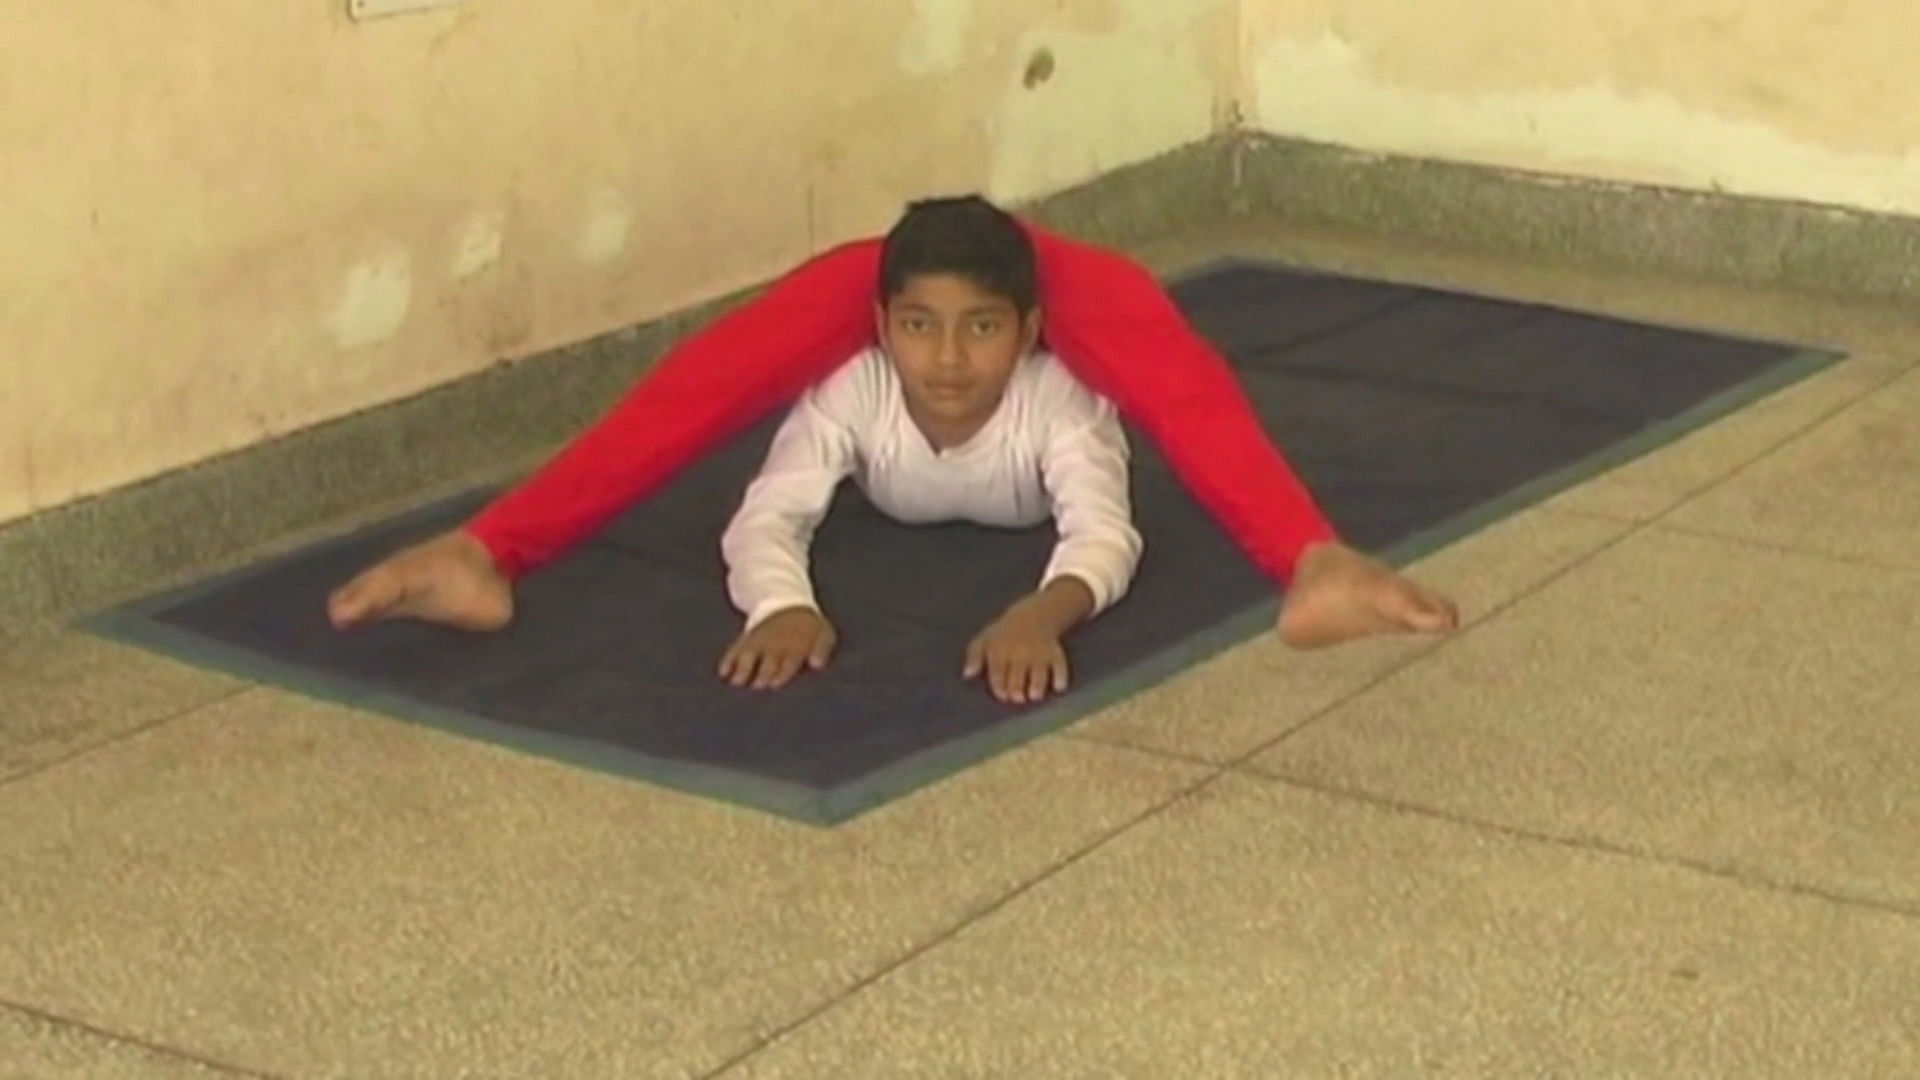 

Rishabh Jha’s flexibility and passion for yoga allows him to twist his body with ease. (Photo: ANI screengrab)